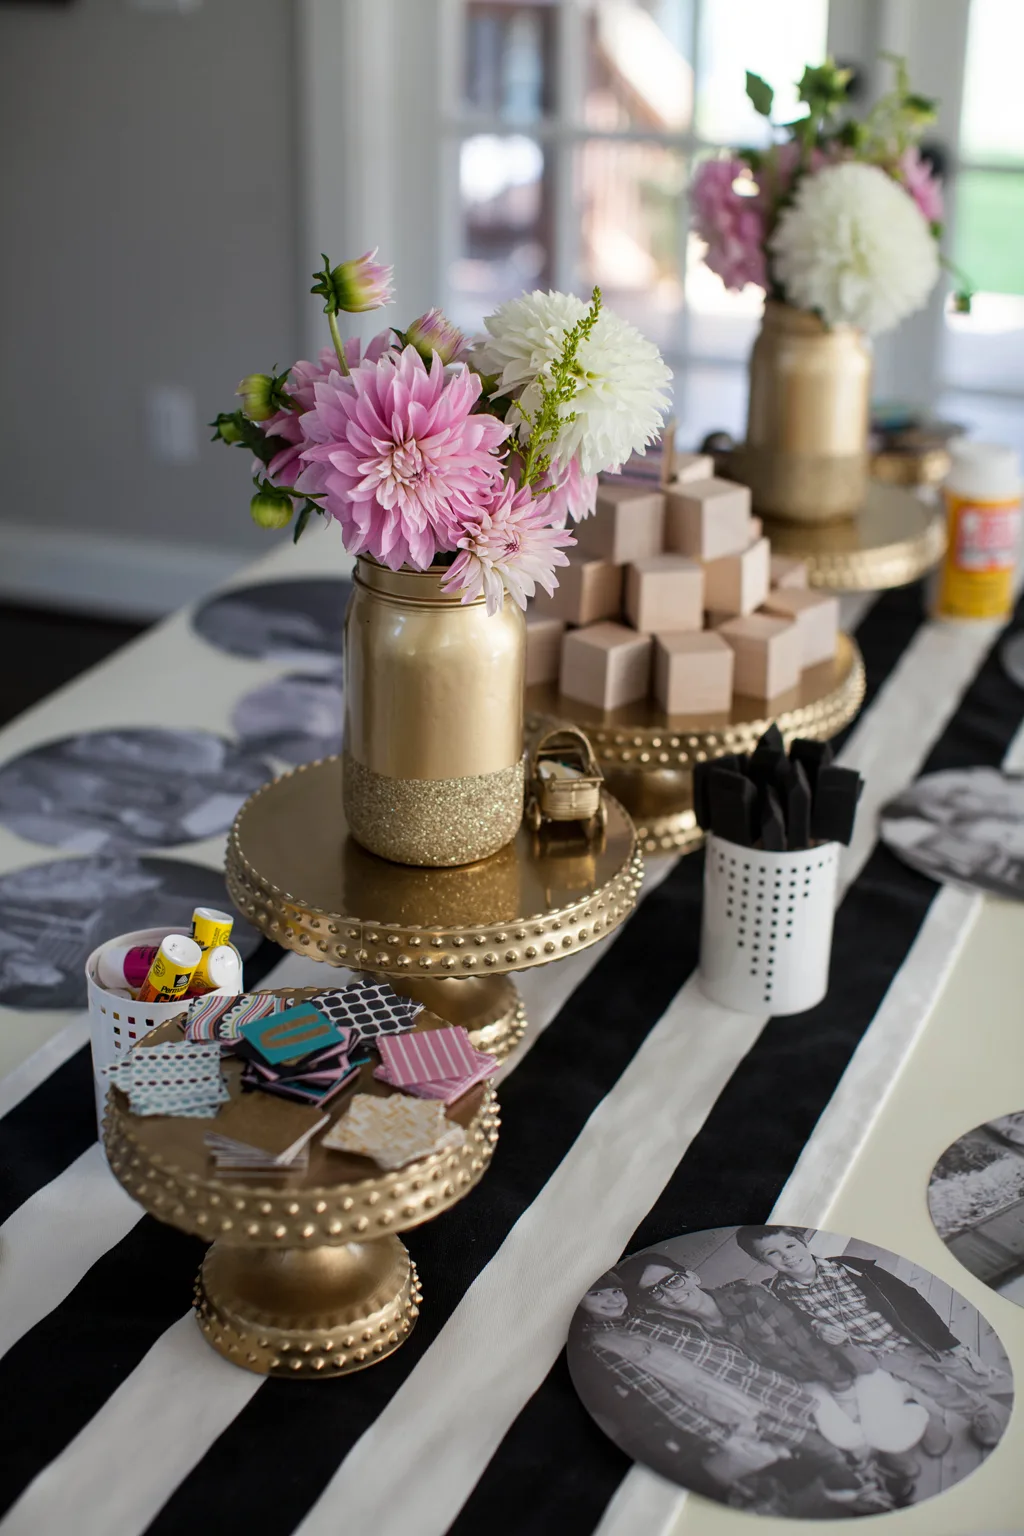 Wooden Block Decorating Station at Baby Shower